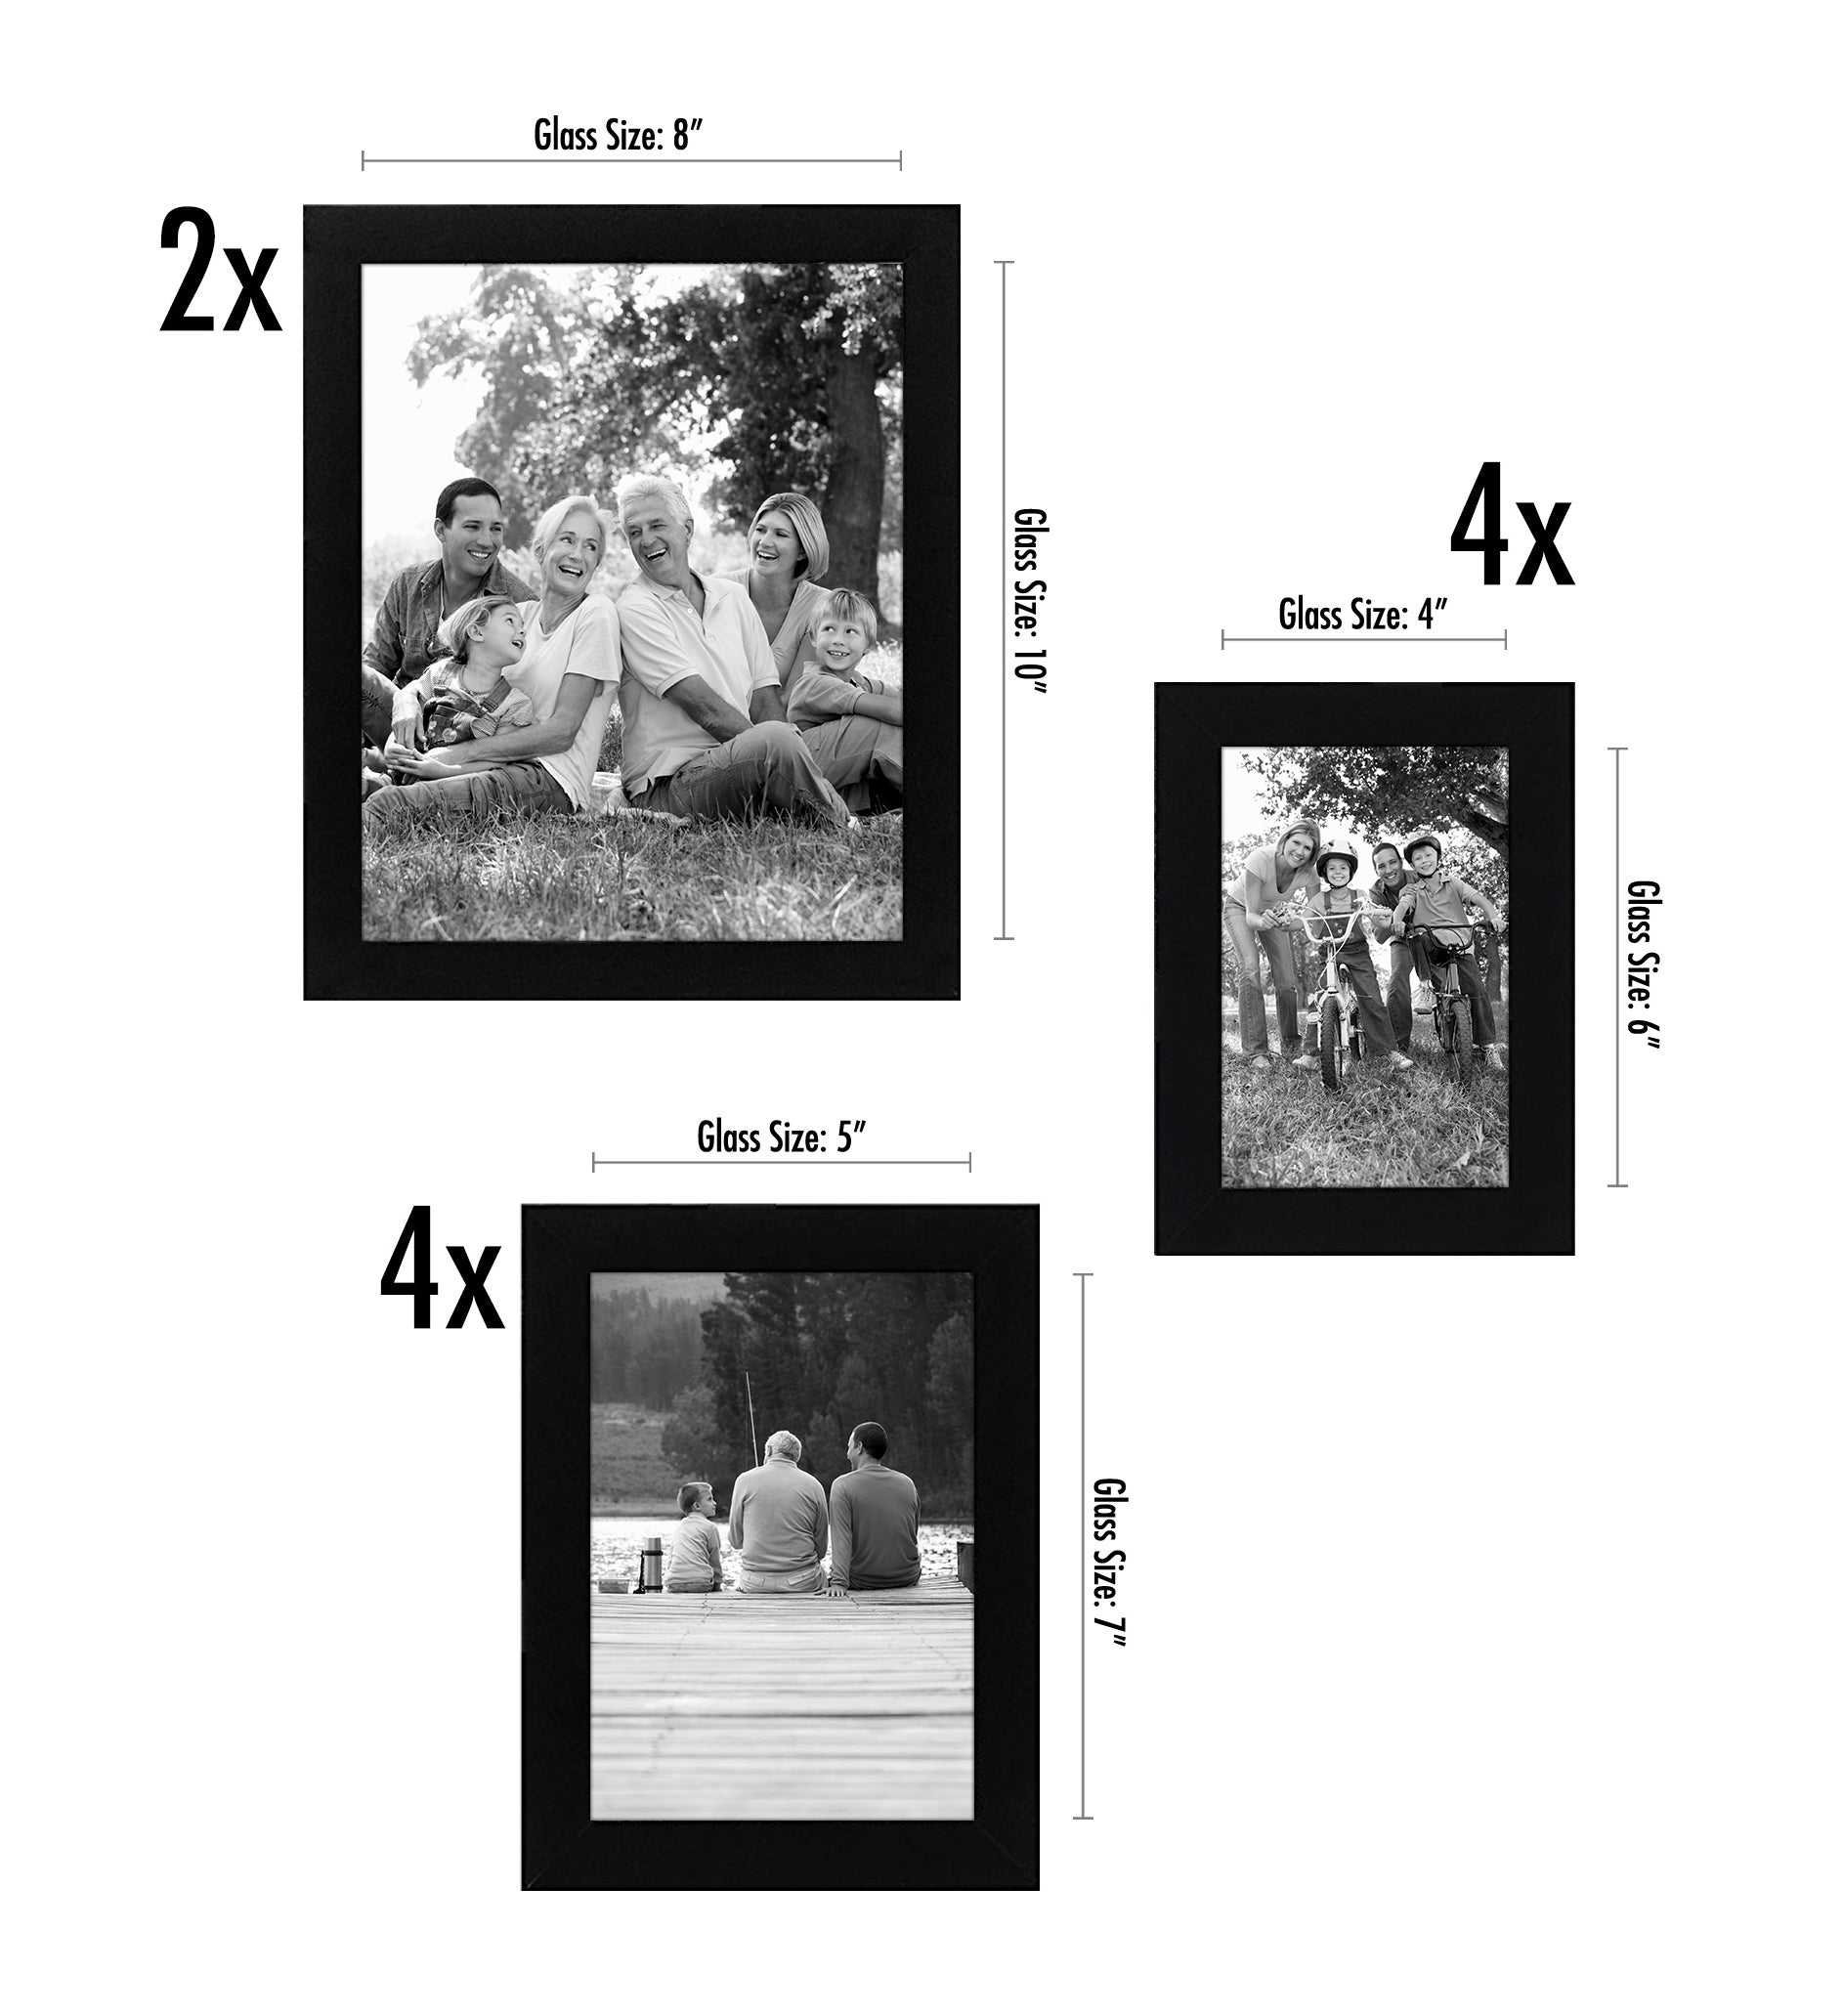 XUANLUO Picture Frames 10 Pack Collage Gallery Wall Decor Set with 4x6 5x7  8x10 Photo Frame for Tabletop or Mounting